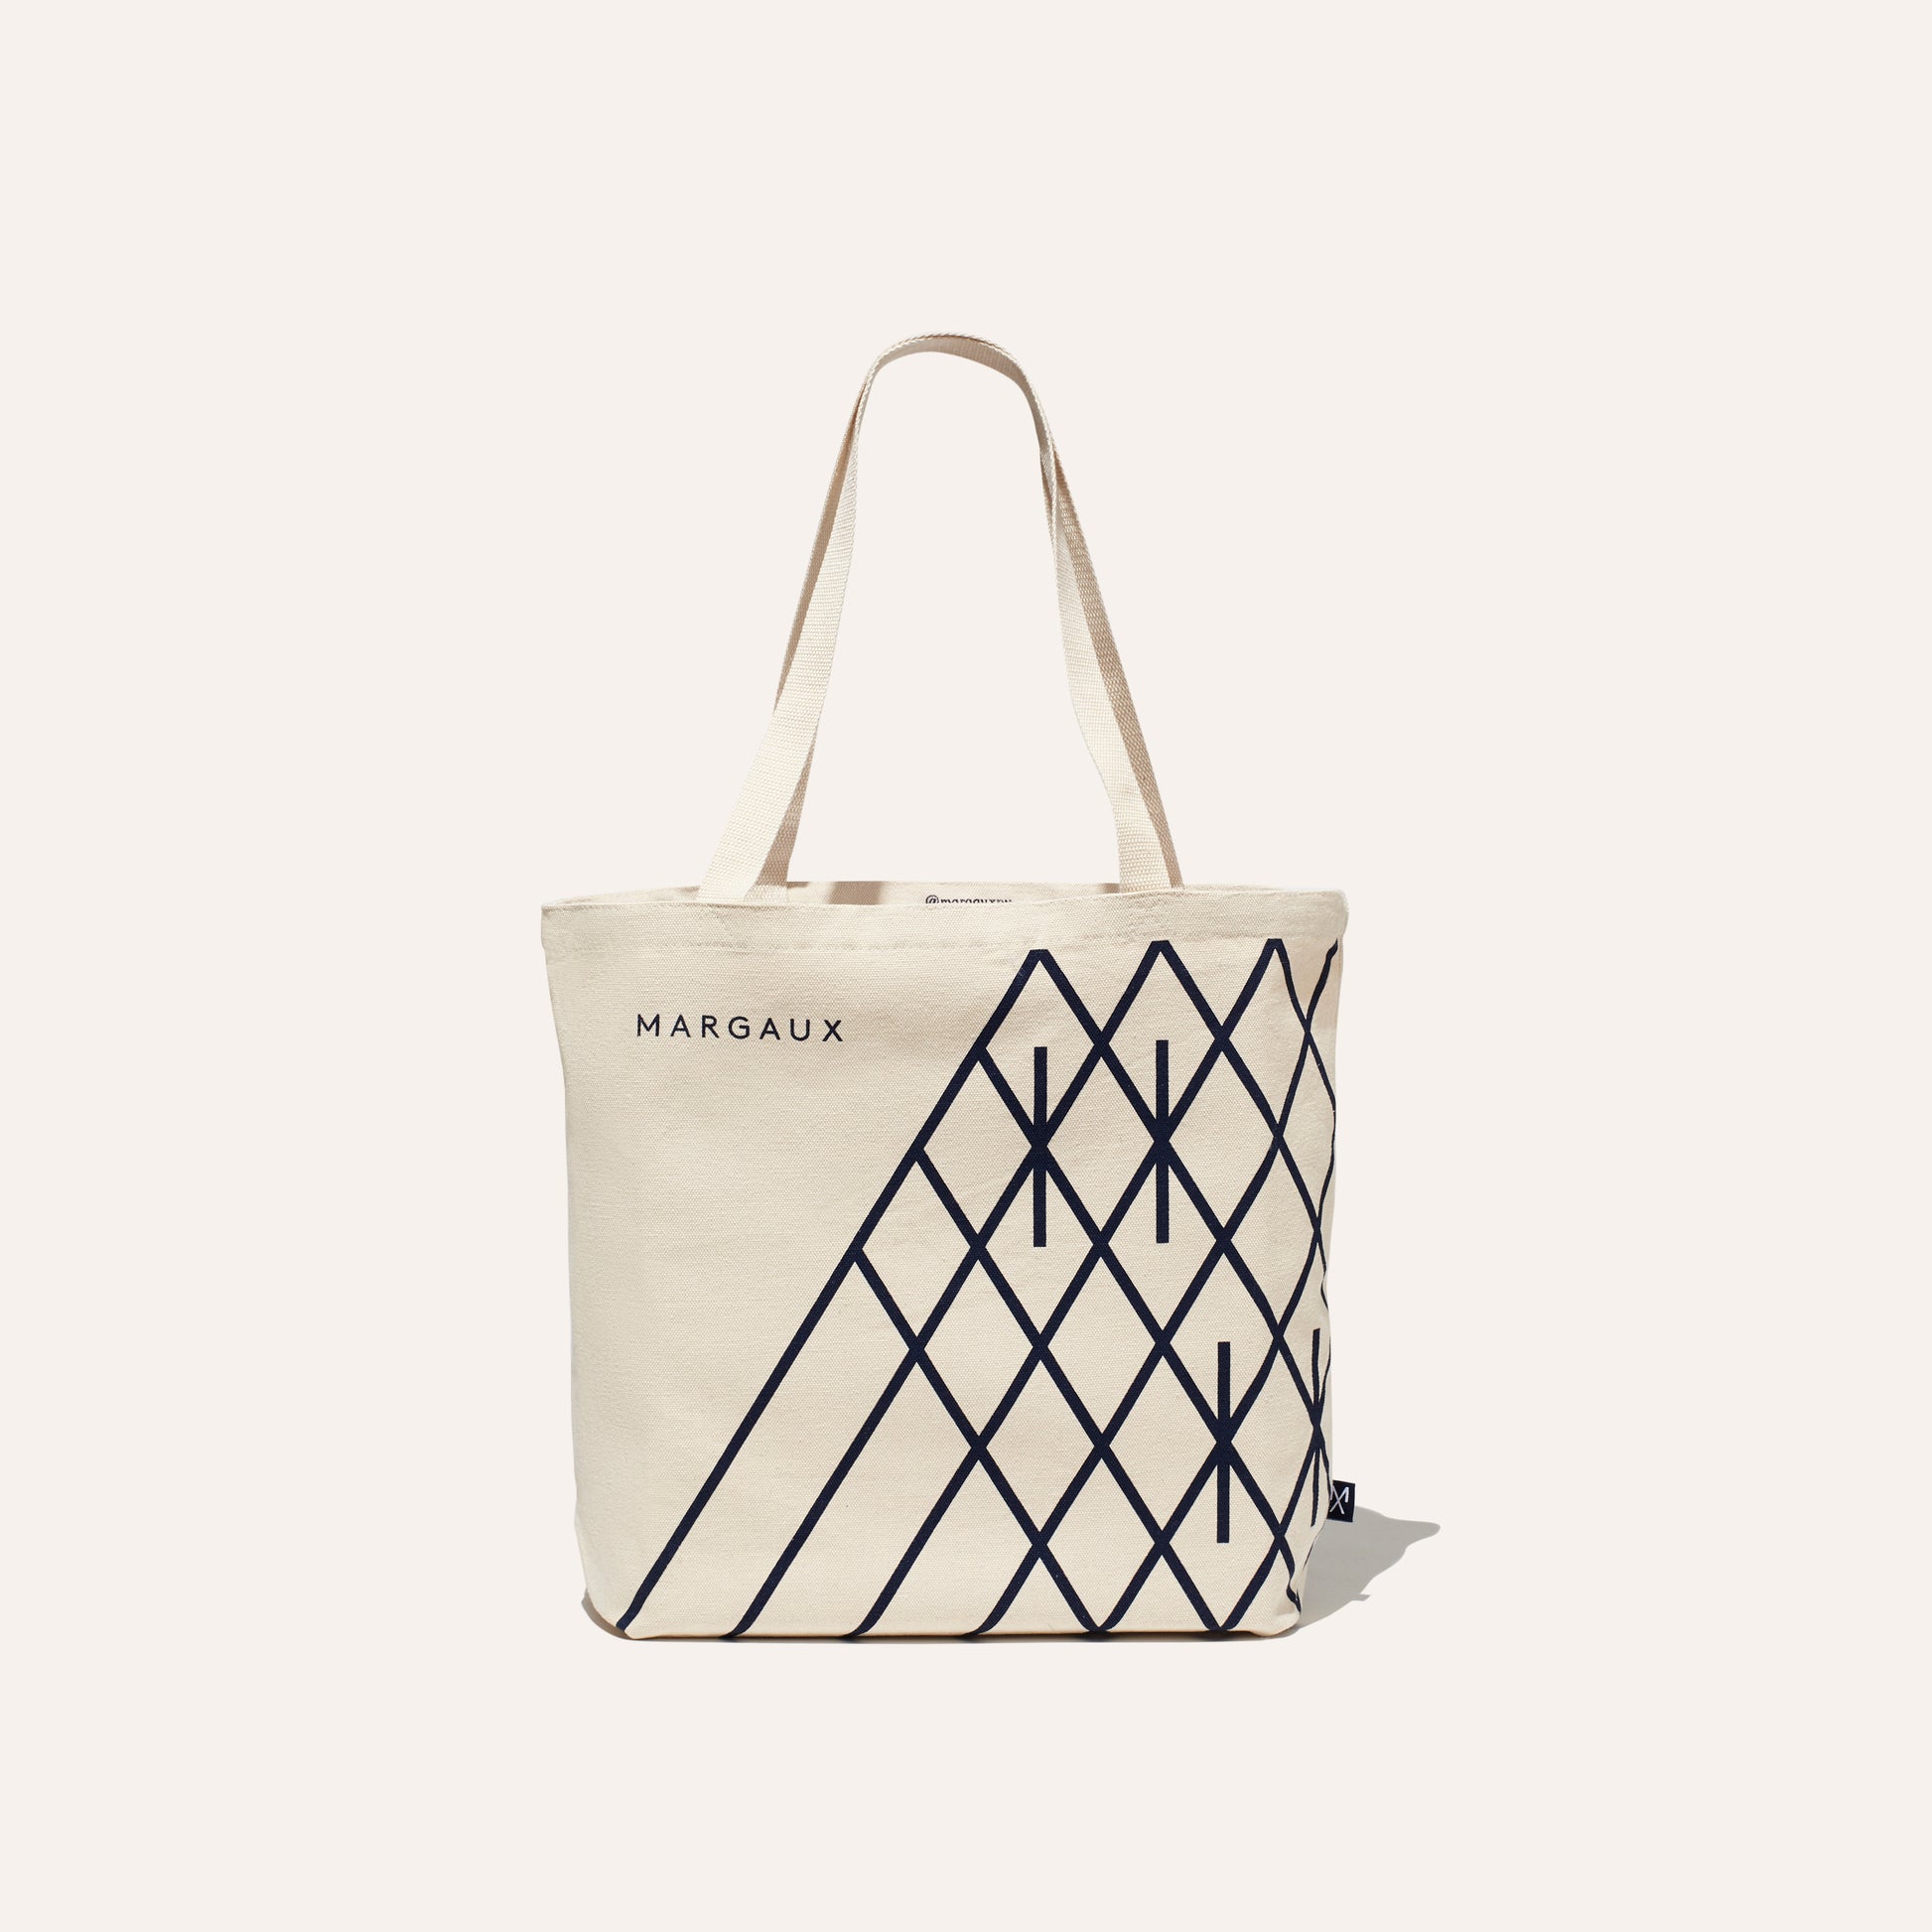 Margaux's cotton tote printed with the brand logo